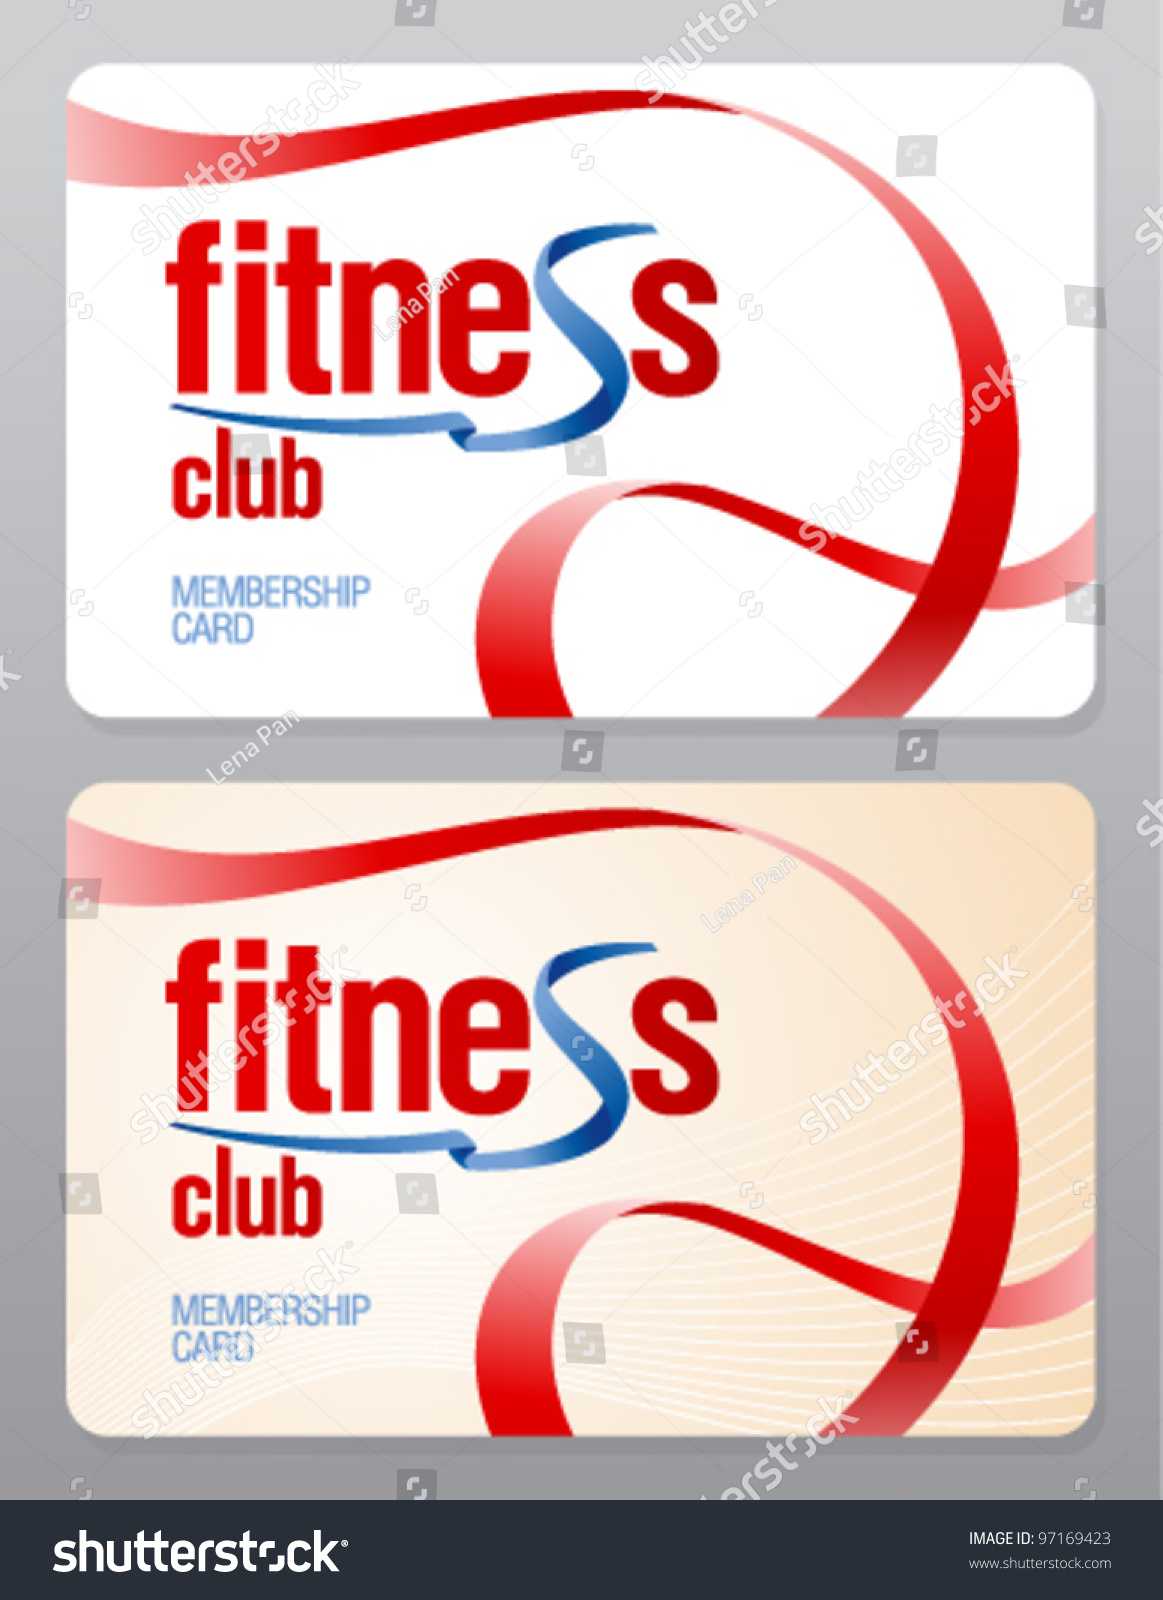 Gym Membership Images, Stock Photos & Vectors | Shutterstock Throughout Gym Membership Card Template